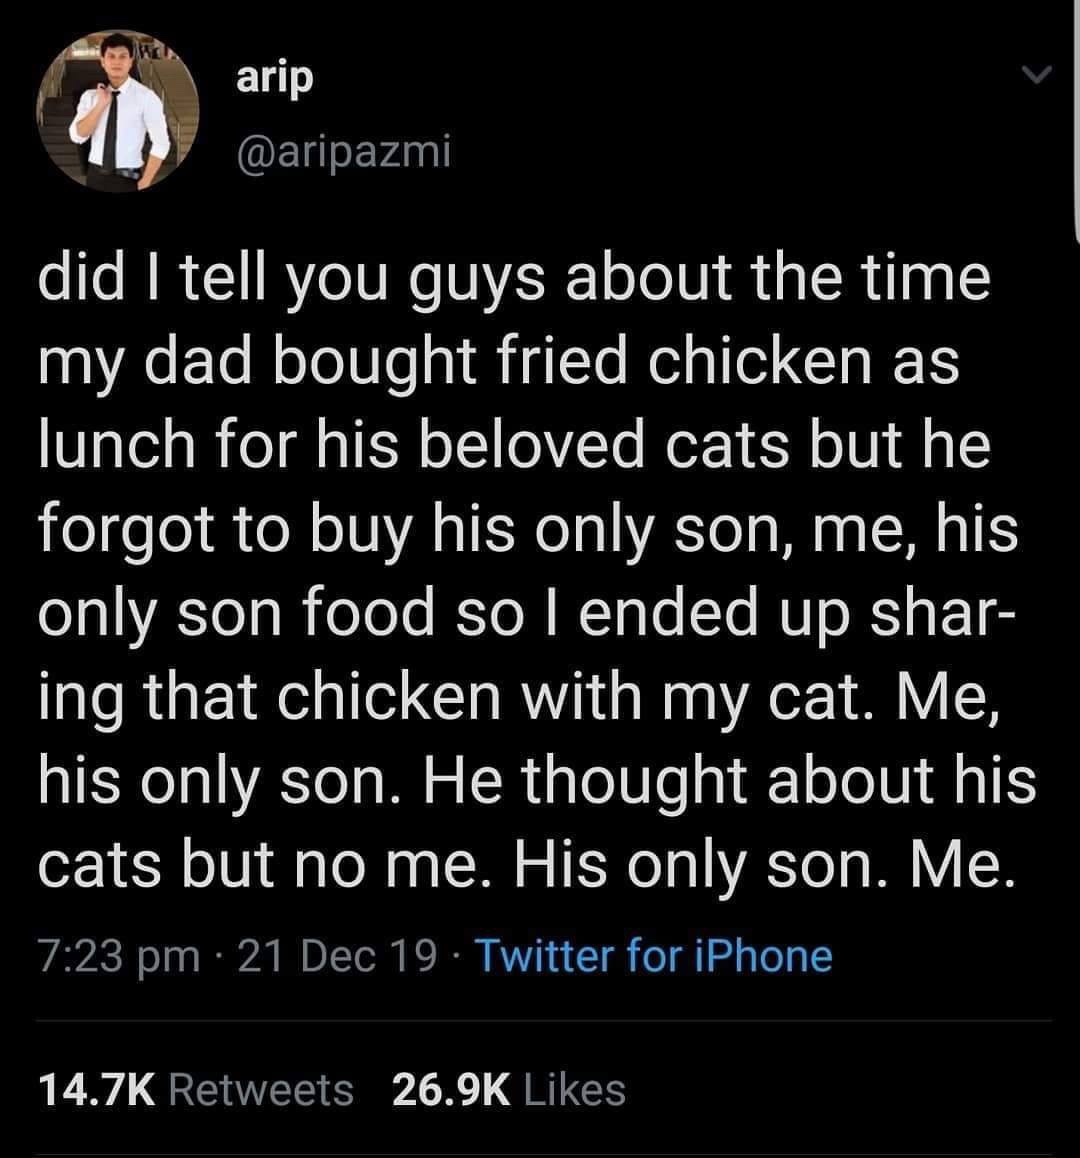 screenshot - arip did I tell you guys about the time my dad bought fried chicken as lunch for his beloved cats but he forgot to buy his only son, me, his only son food so I ended up shar ing that chicken with my cat. Me, his only son. He thought about his